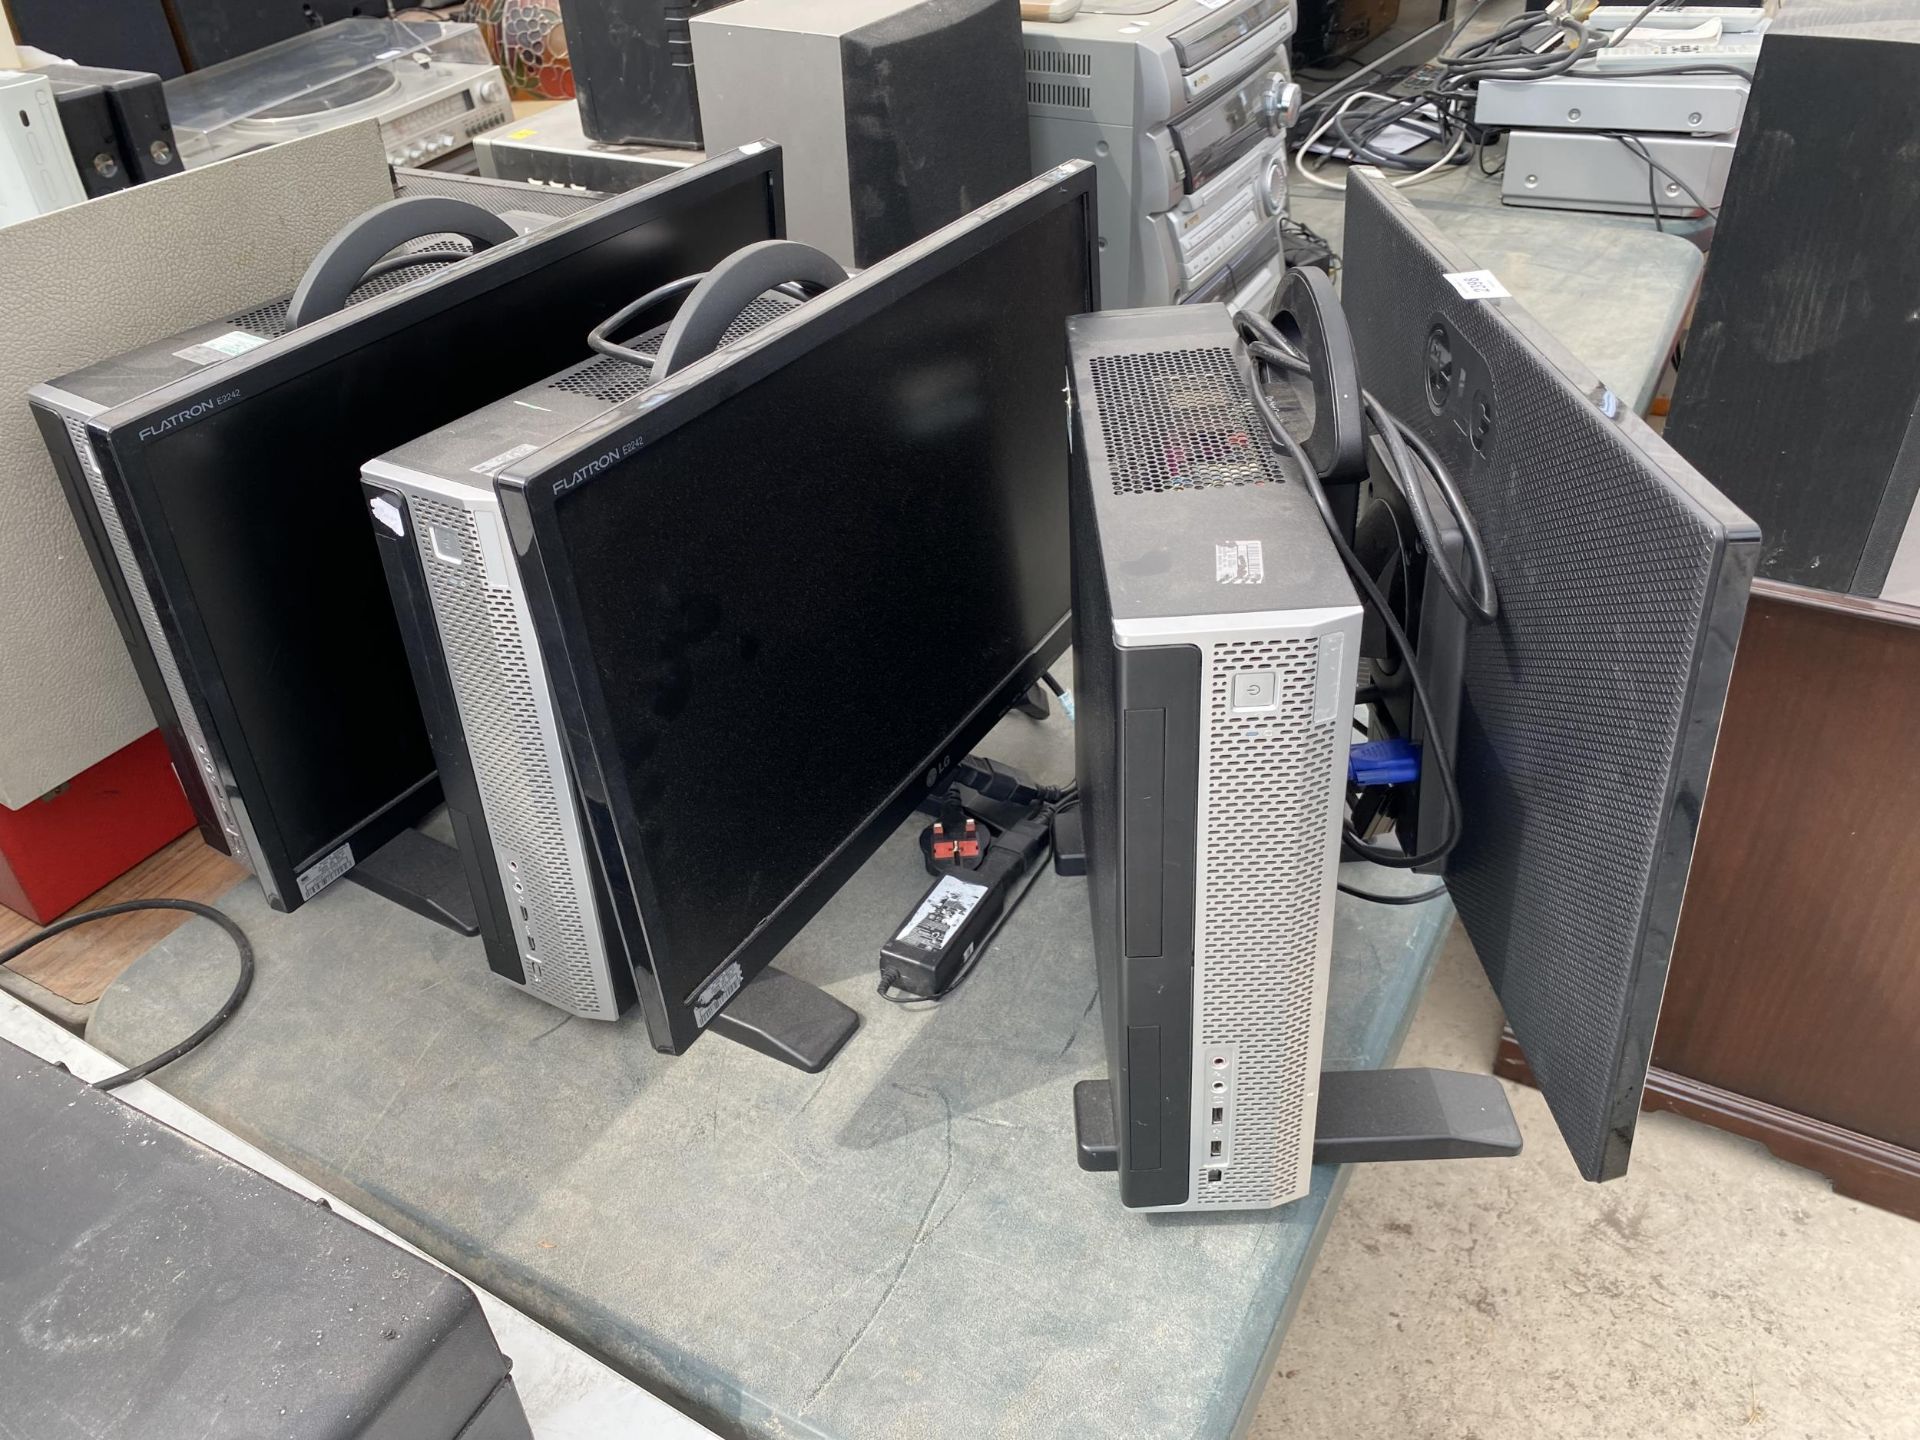 THREE LG COMPUTER MONITORS WITH ATTATCHED TOWERS